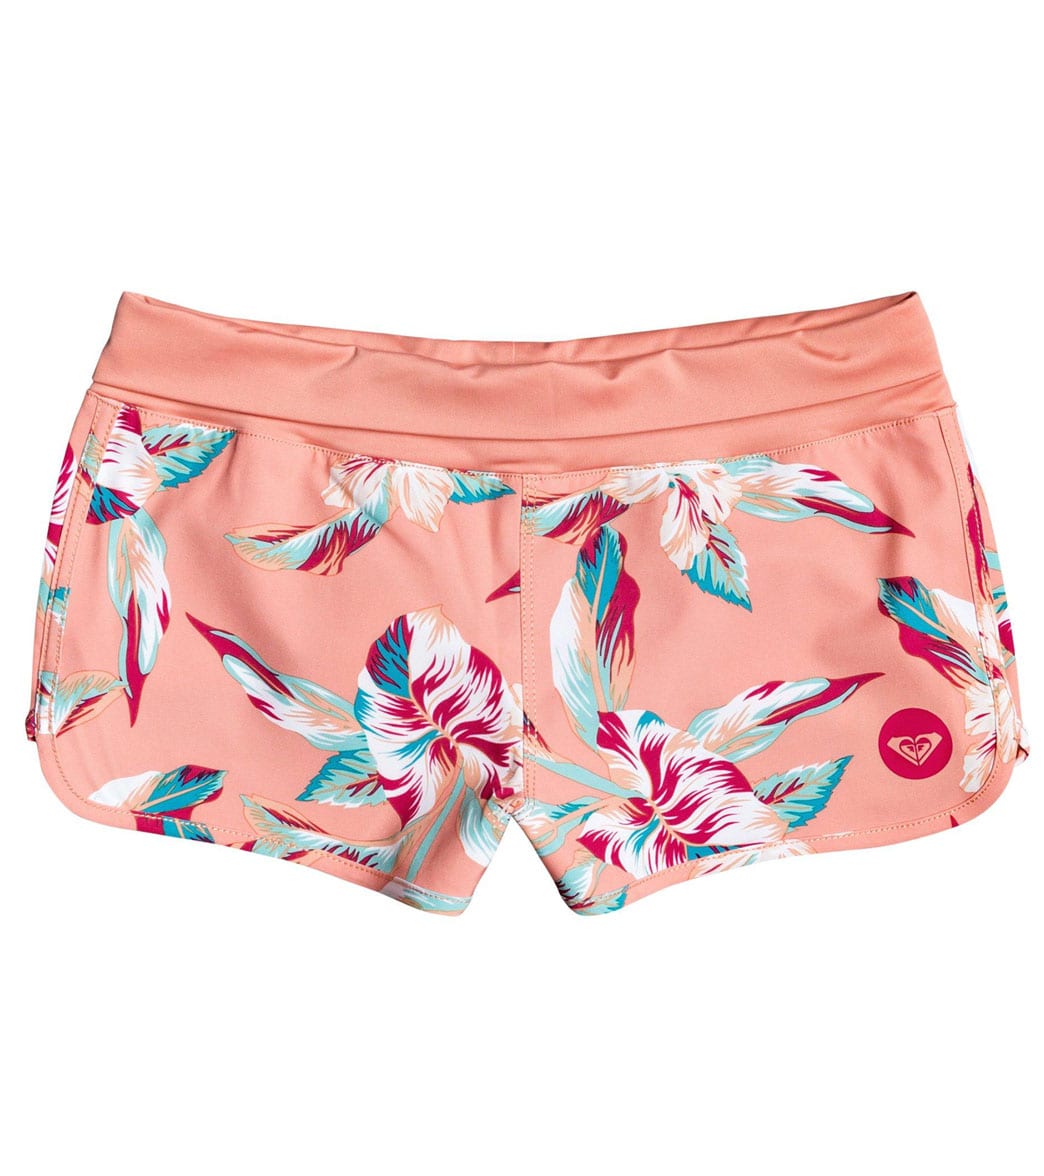 Roxy Girls' Made For Roxy Boardshort (Big Kid) at SwimOutlet.com